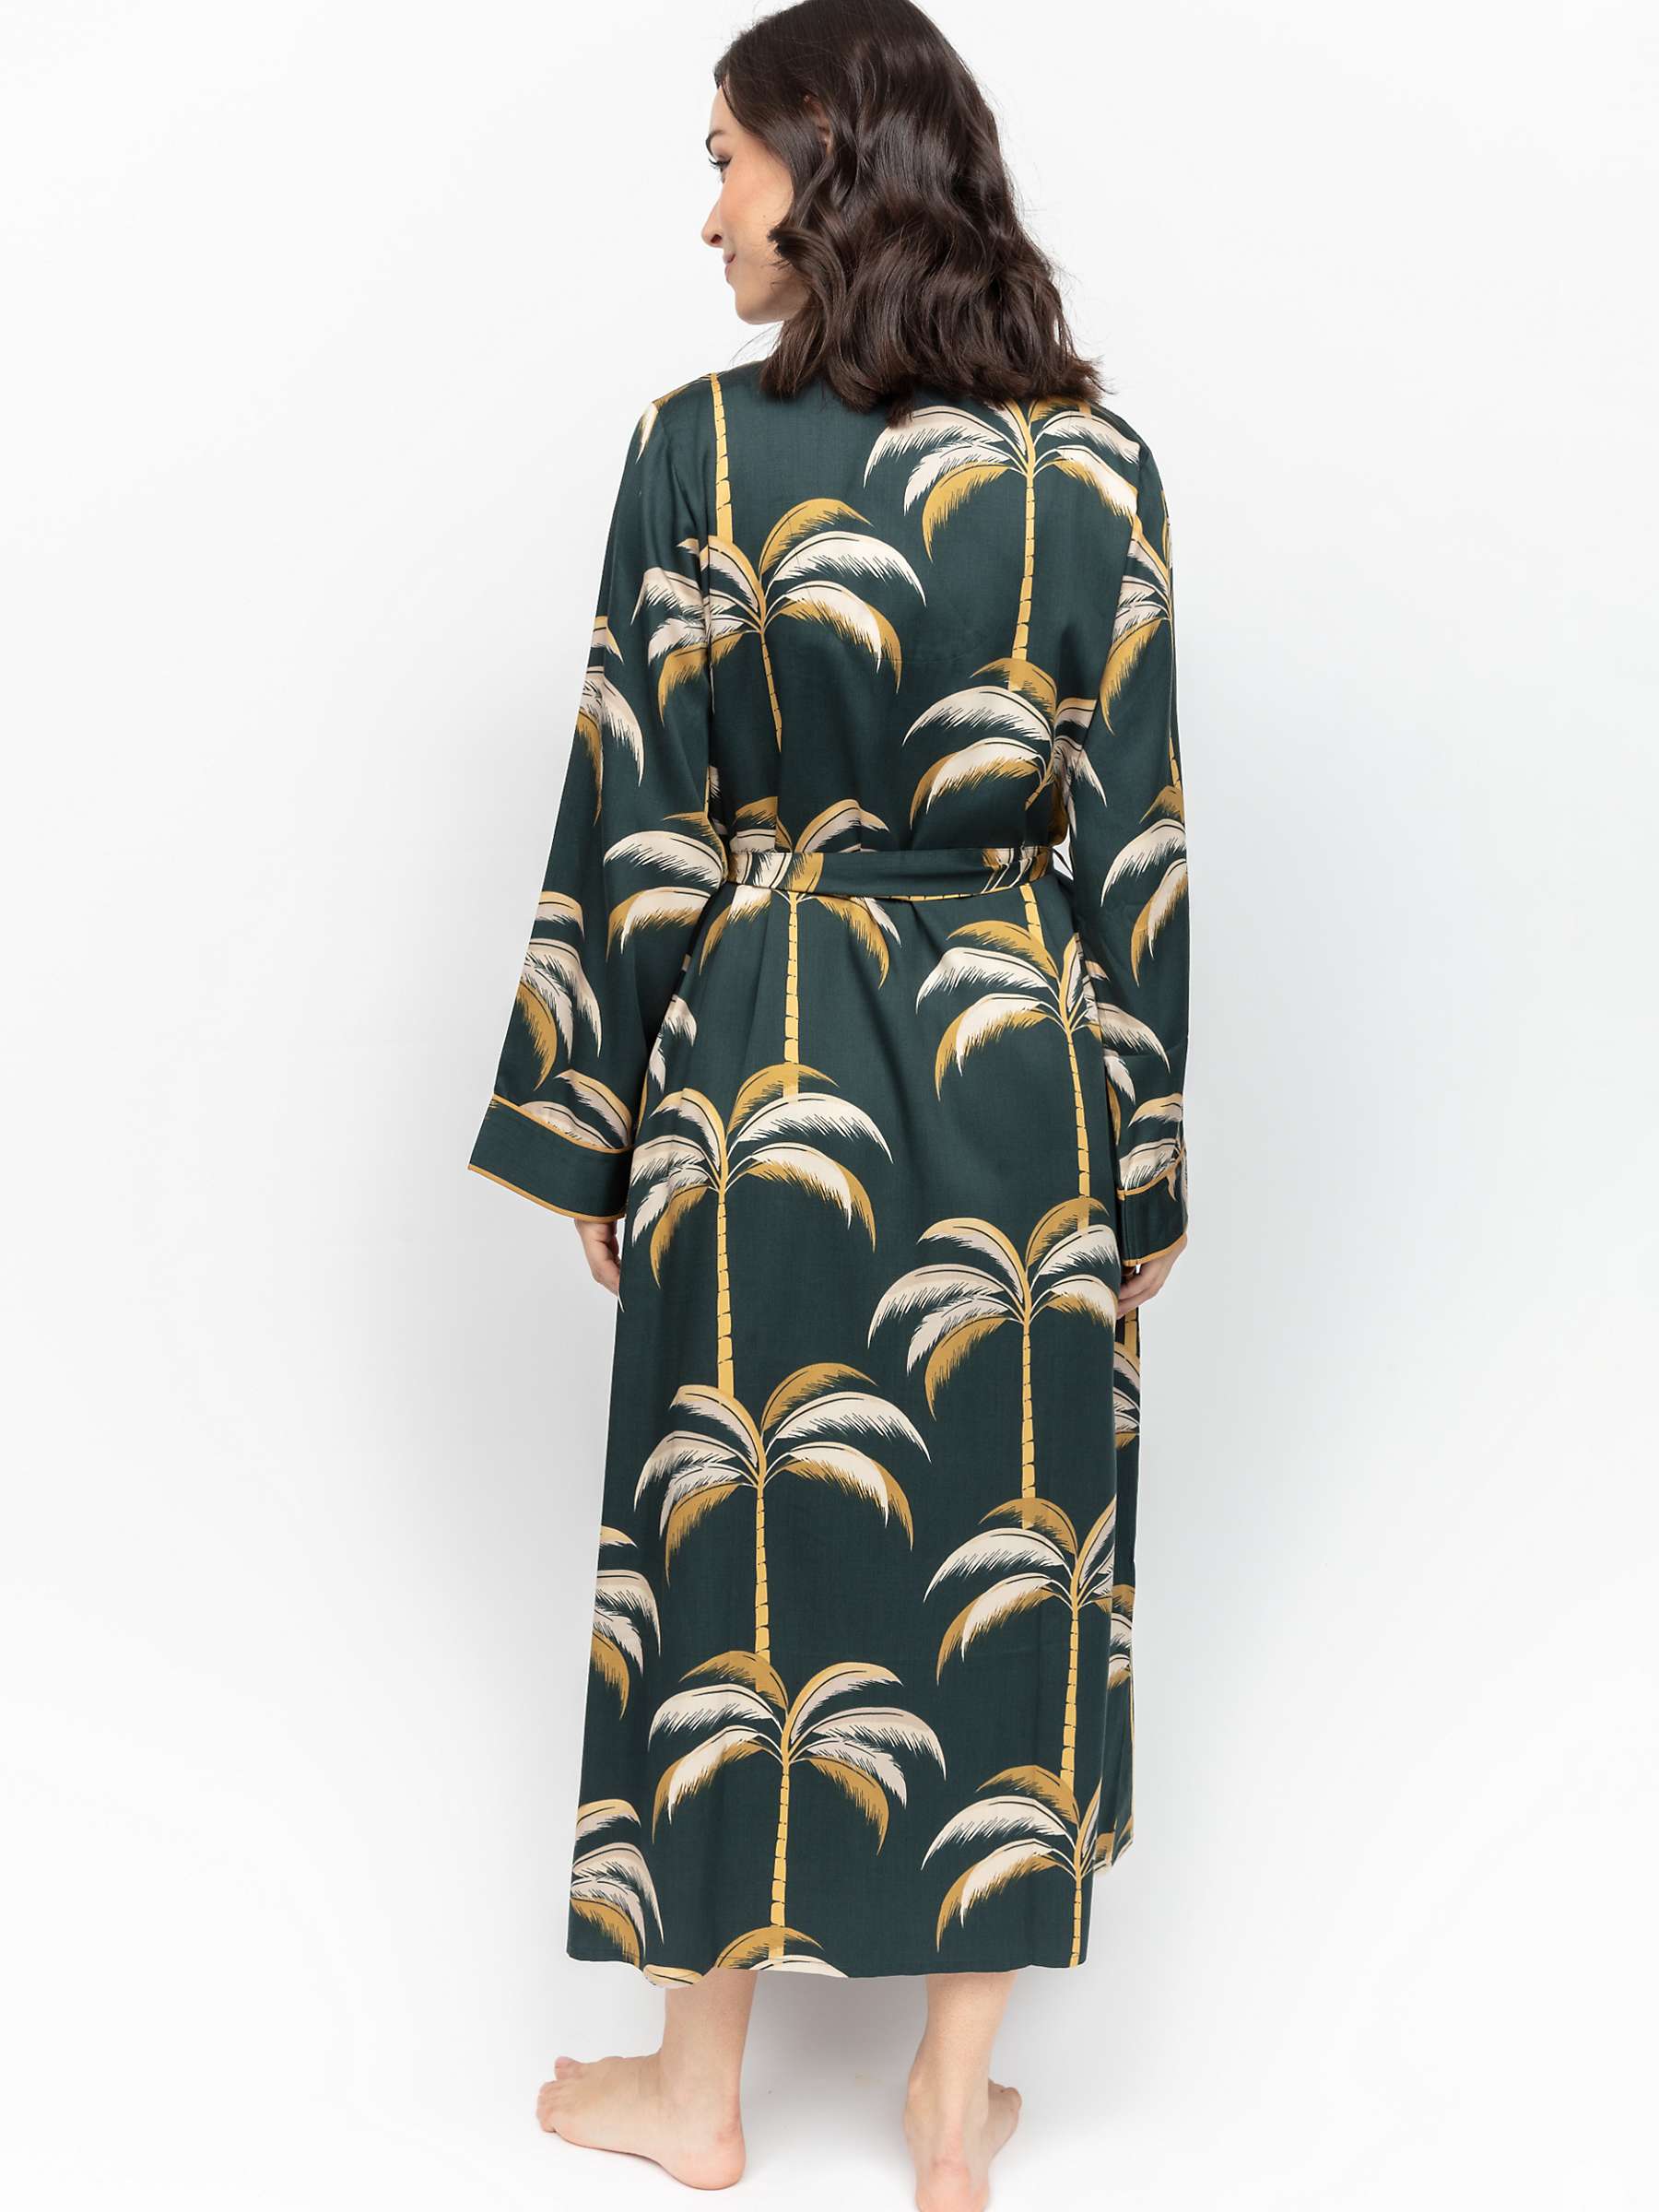 Buy Fable & Eve Pimlico Palm Print Dressing Gown, Emerald Green Online at johnlewis.com